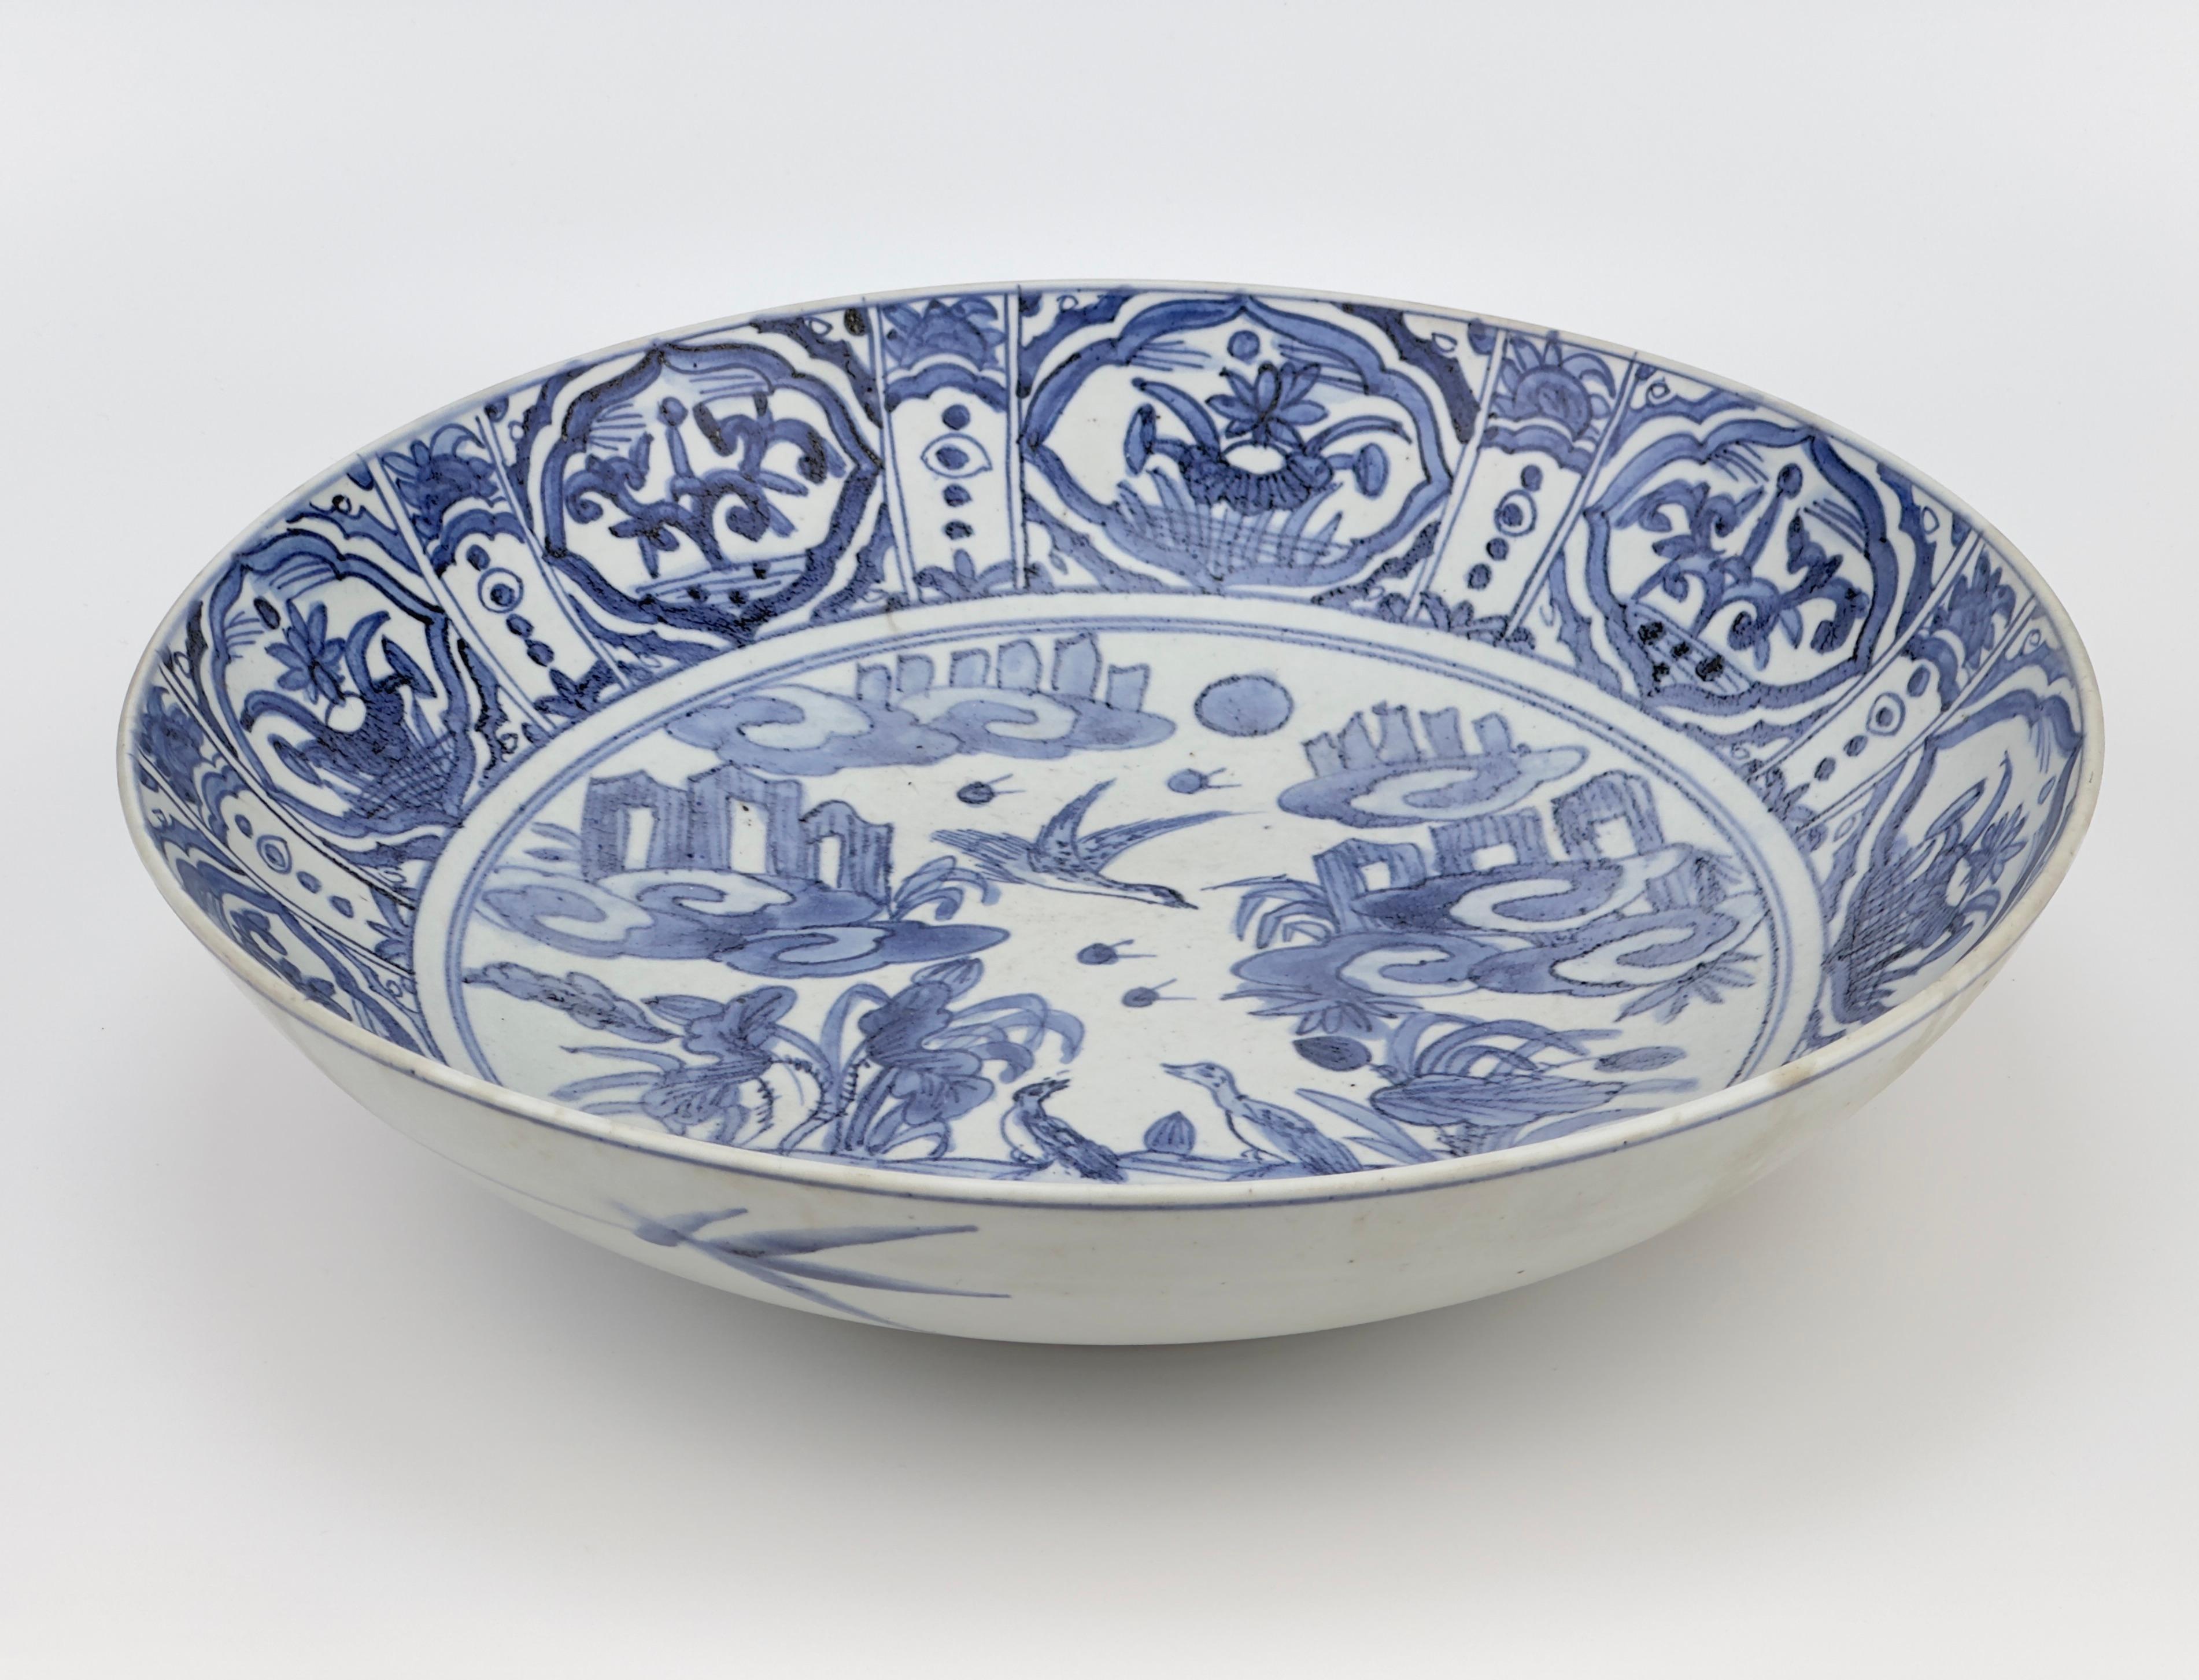 Famous late ming dynasty chinese blue and white swatow porcelain plate. Birds are depicted playing in nature with rocks. Compared to the same type of swatow porcelain, the blue color development and painting are outstanding.

Period: Late Ming